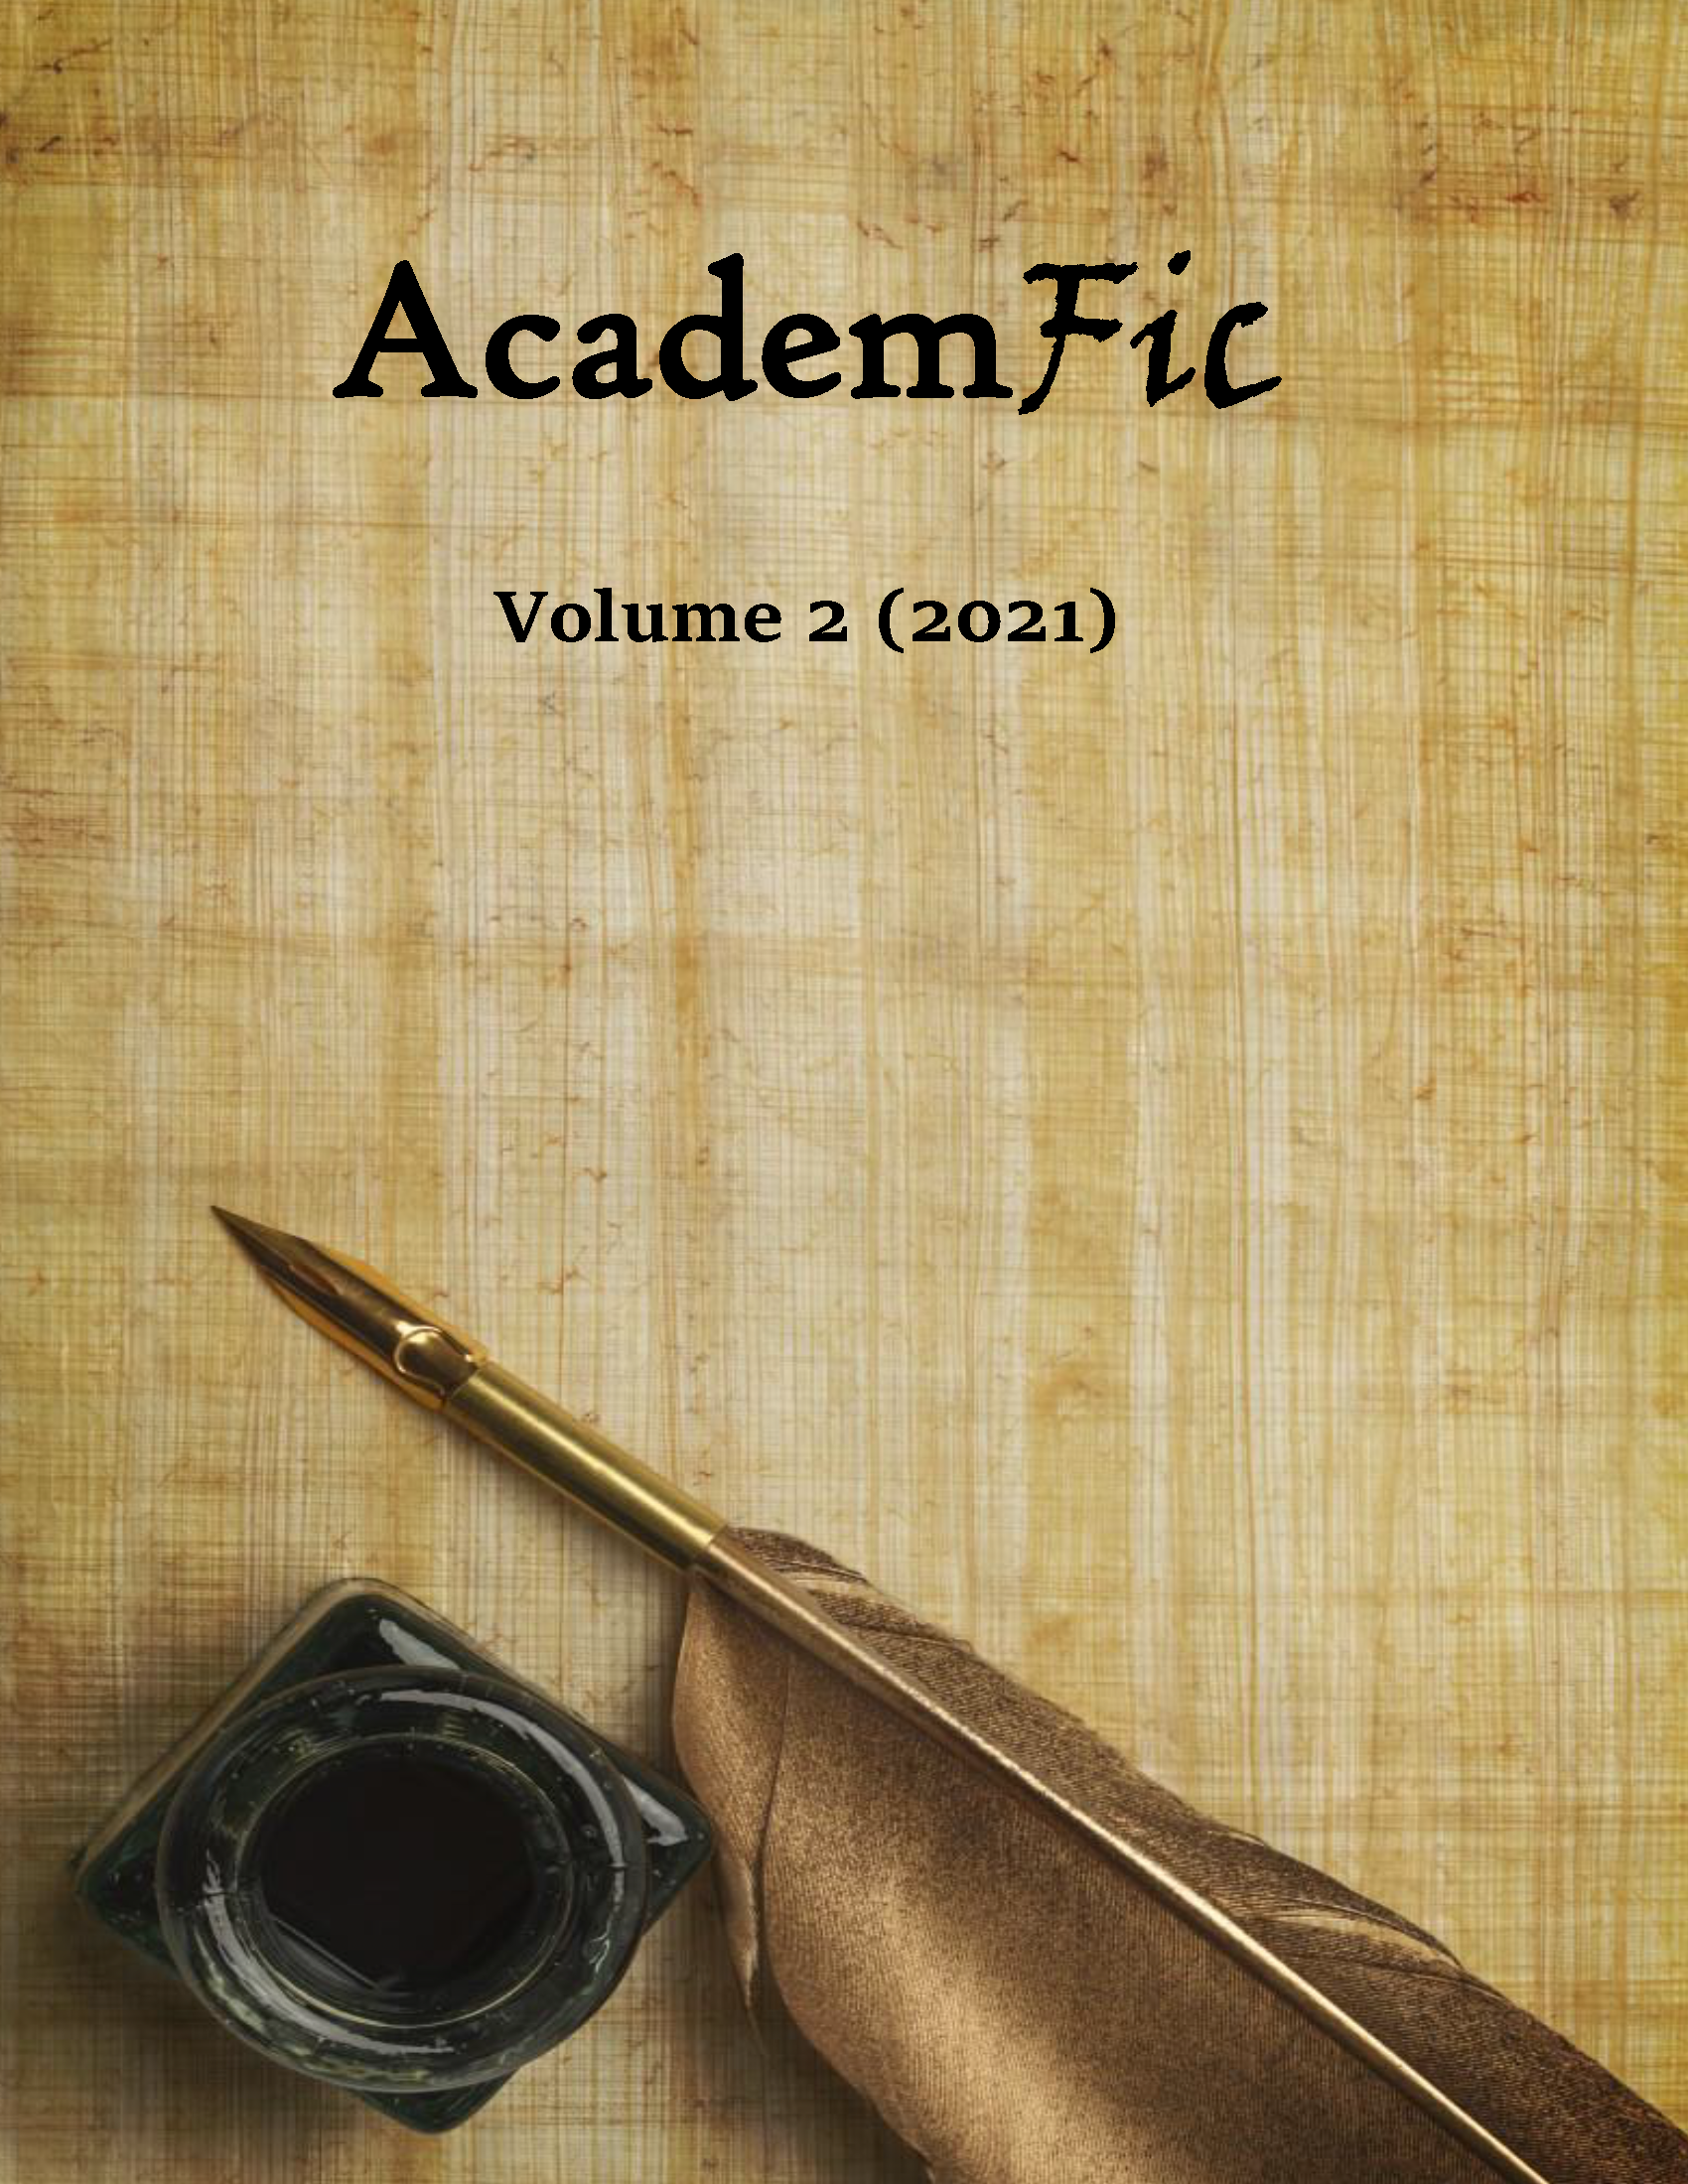 Cover image for AcademicFic Volume 2. Quill and ink bottle in the bottom, left corner.